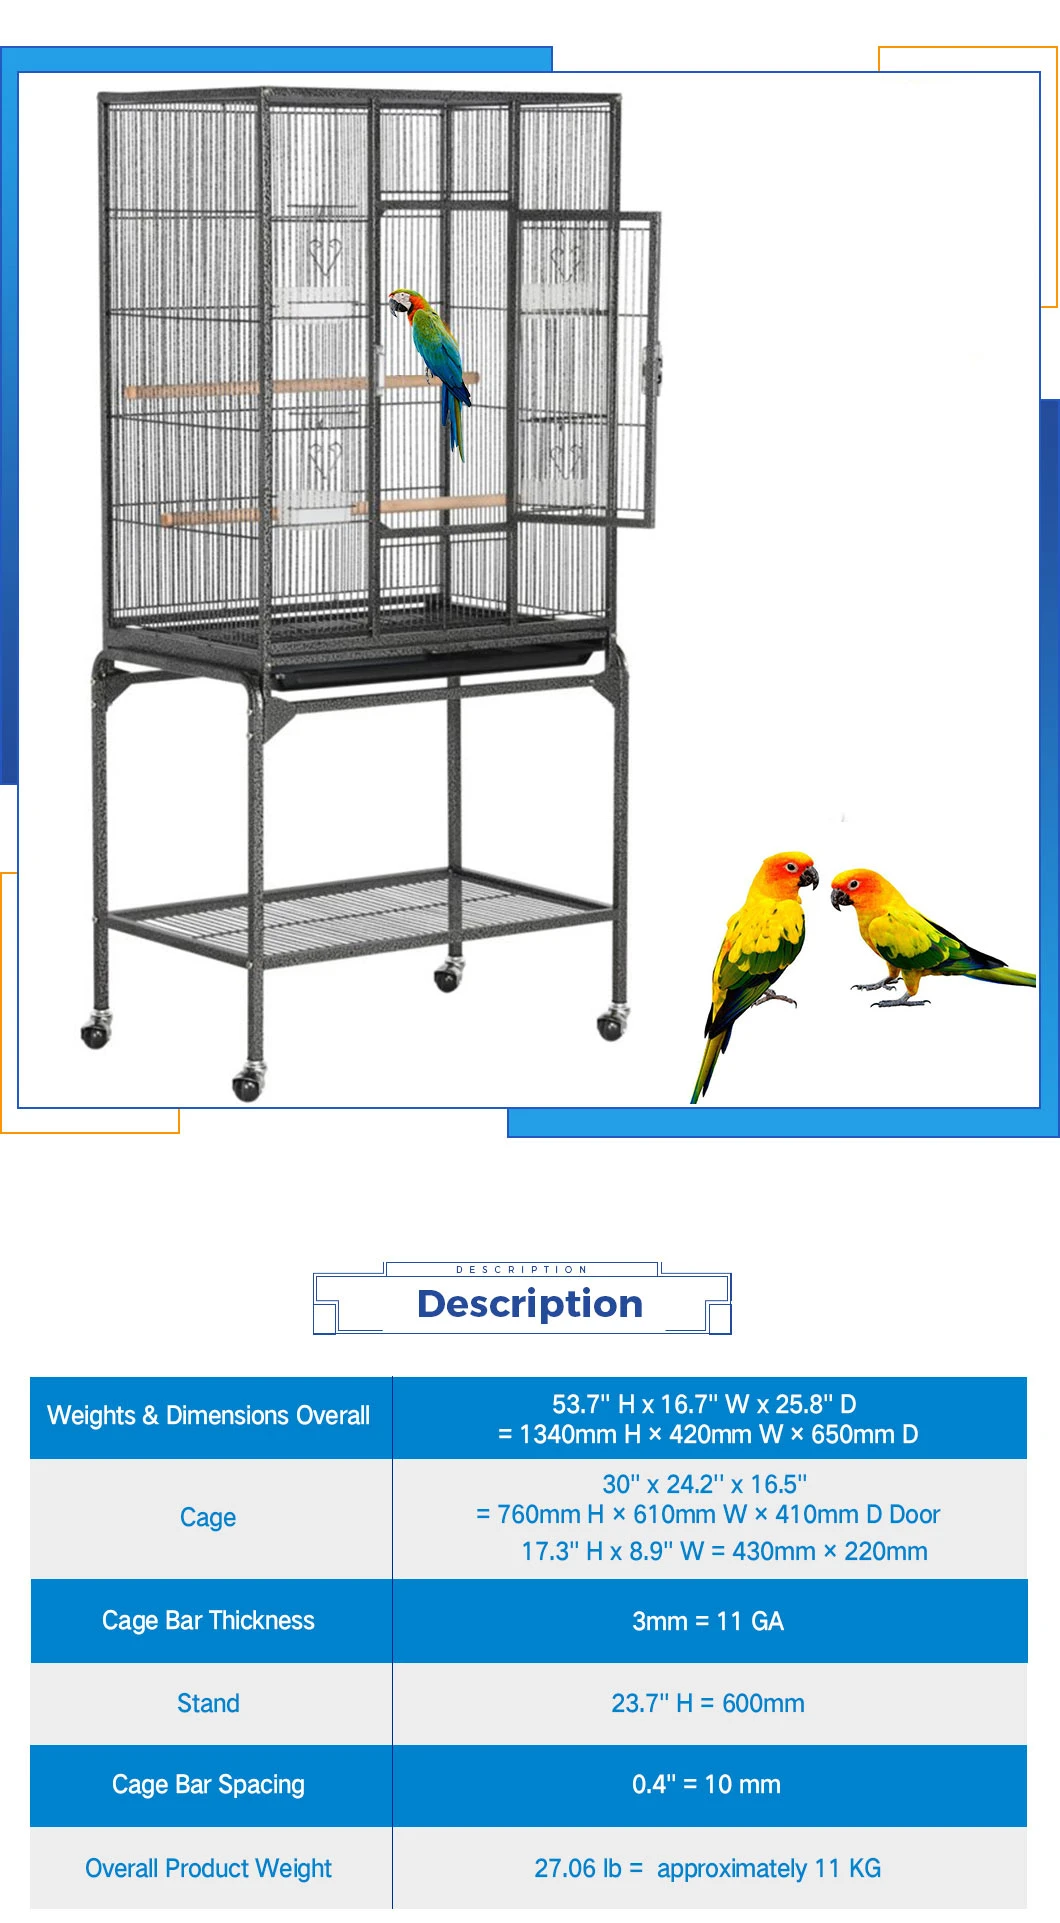 Big Metal Bird Cage, Parrot Cage, Aviary Cage, Breeding Cage, Bird Cage with Wheels